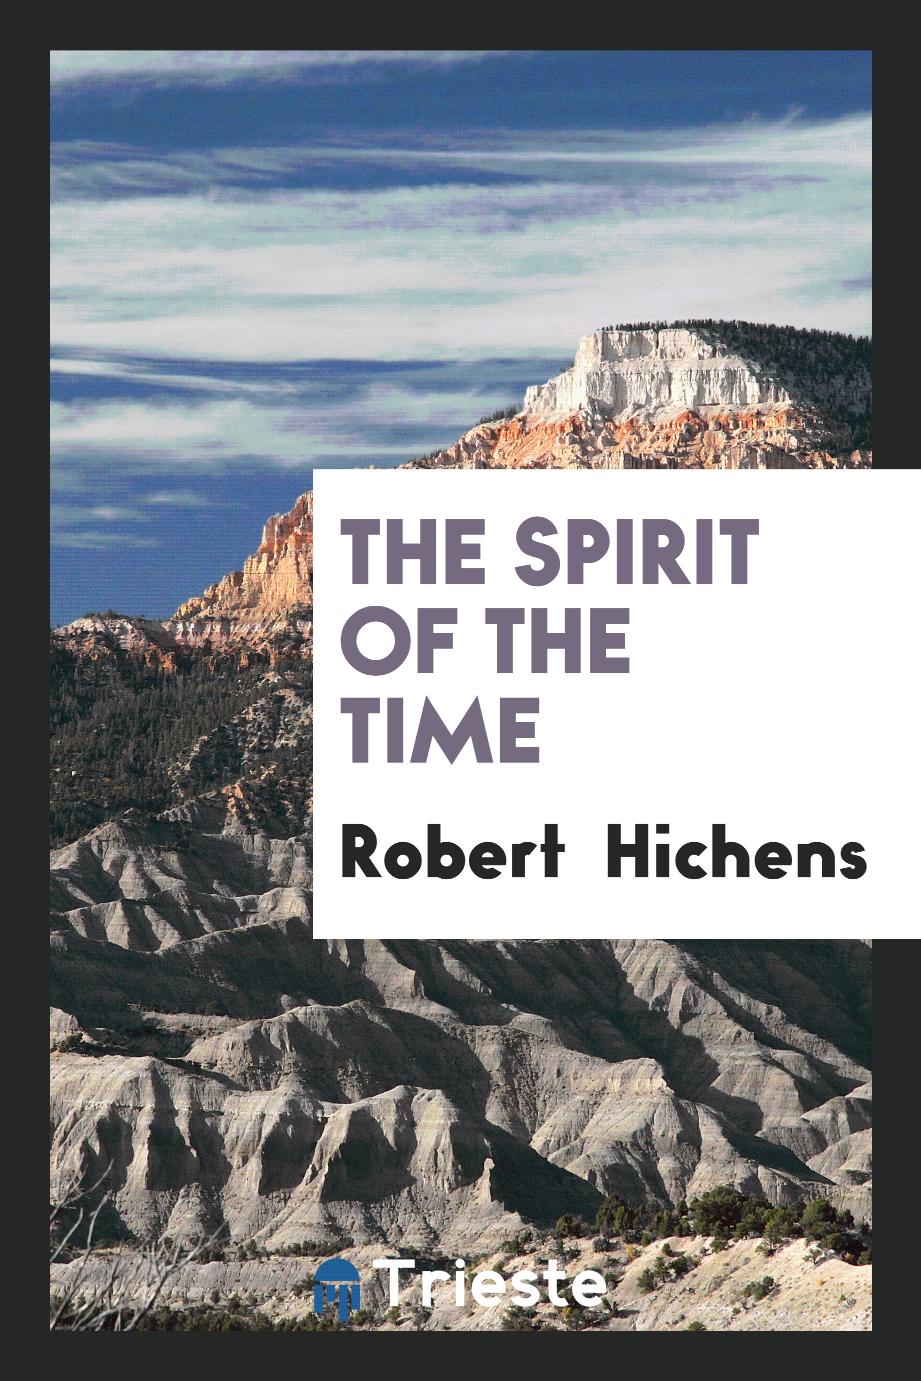 The spirit of the time